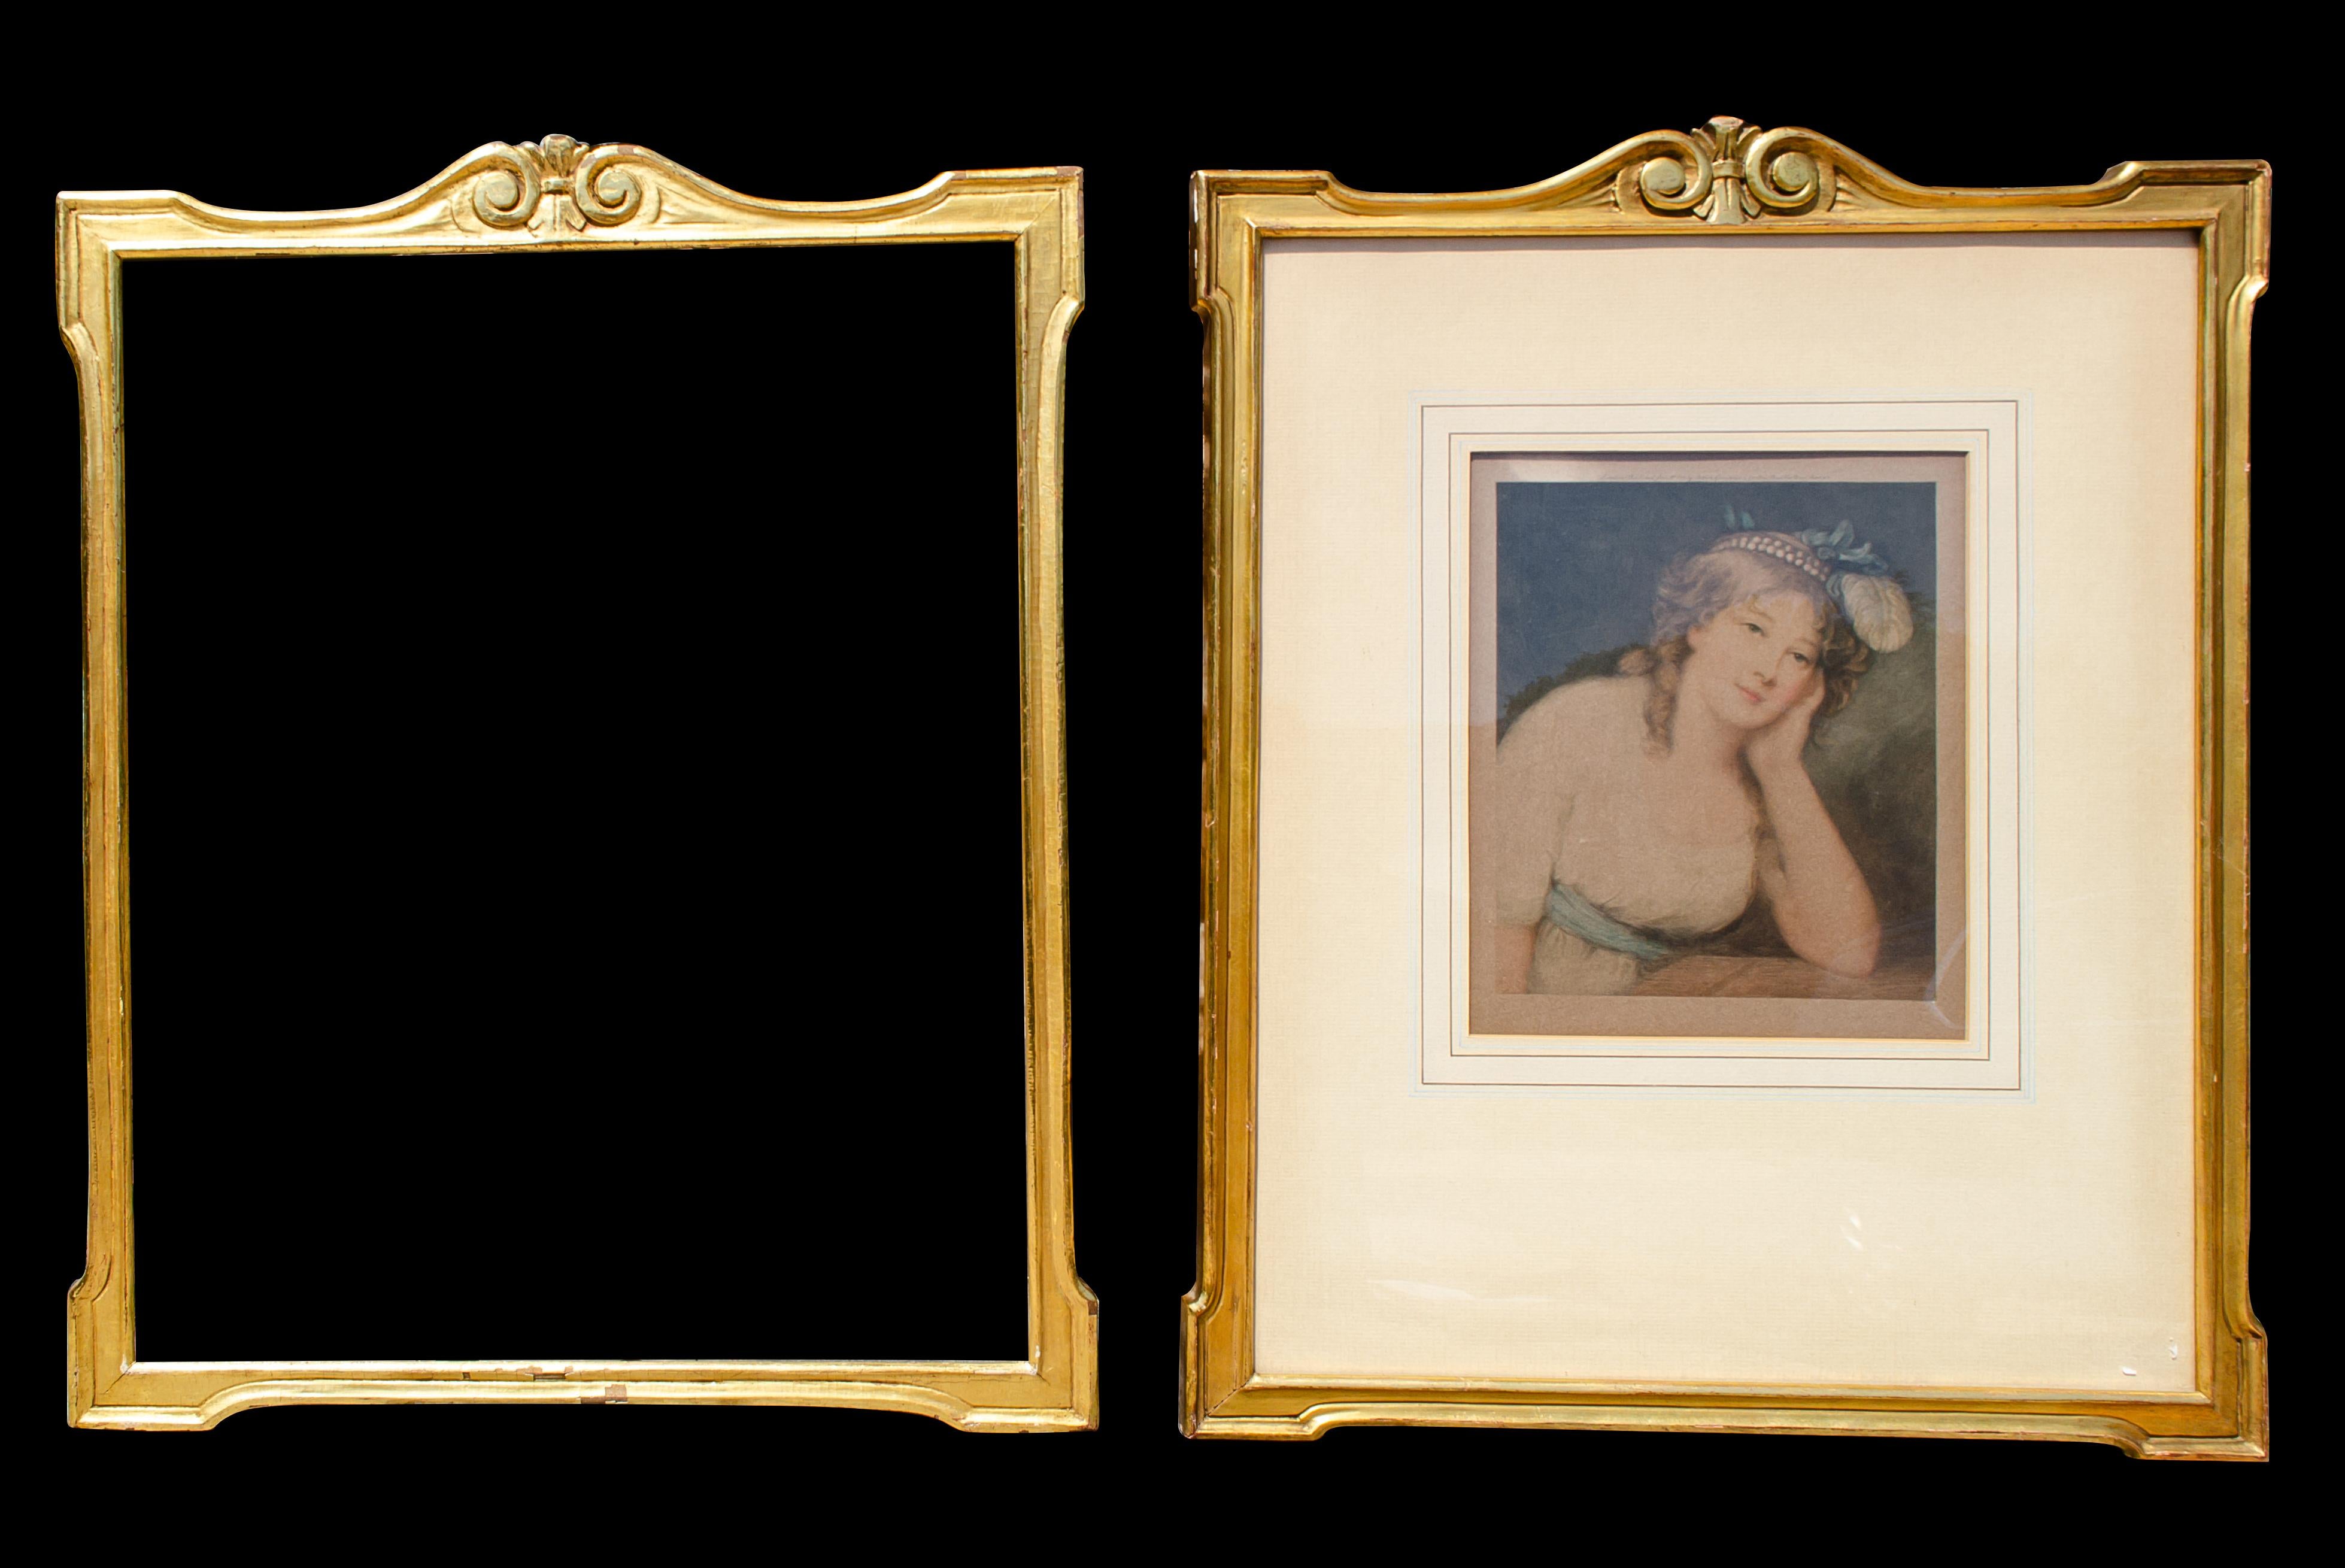 Two Hand Crafted Foster Brothers Frames, Gilded, c. 1920
Wood and gold leaf
22 7/8 x 18 x 3/4 inches each
Note: One frame contains a mezzotint by William Henderson.

Established by Stephen Bartlett Foster (1856-1932) and John Roy Foster (1863-1931),